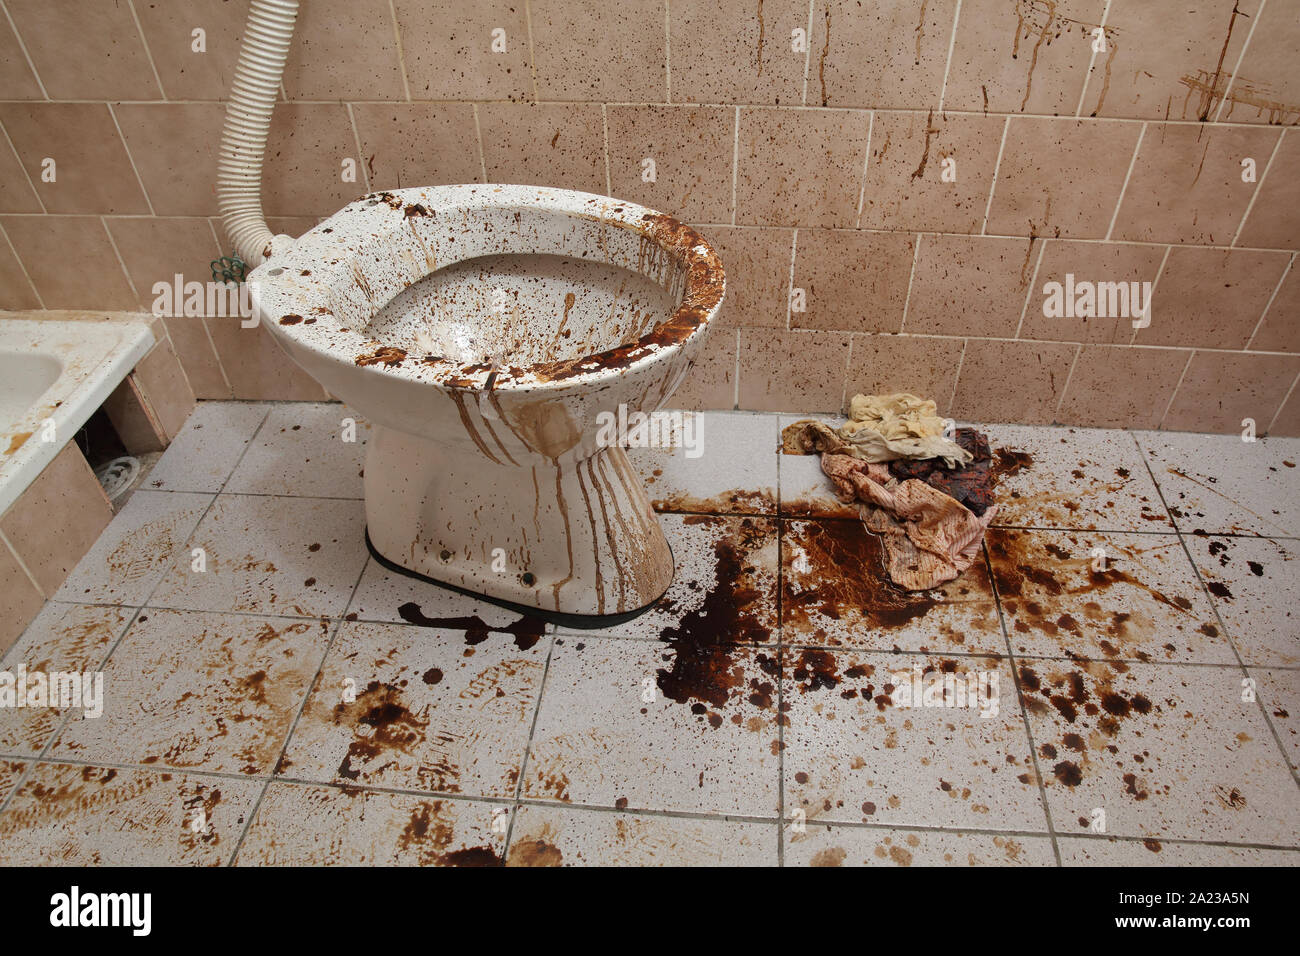 Extremely messy toilet in a dirty bathroom, very bad condition Stock Photo  - Alamy